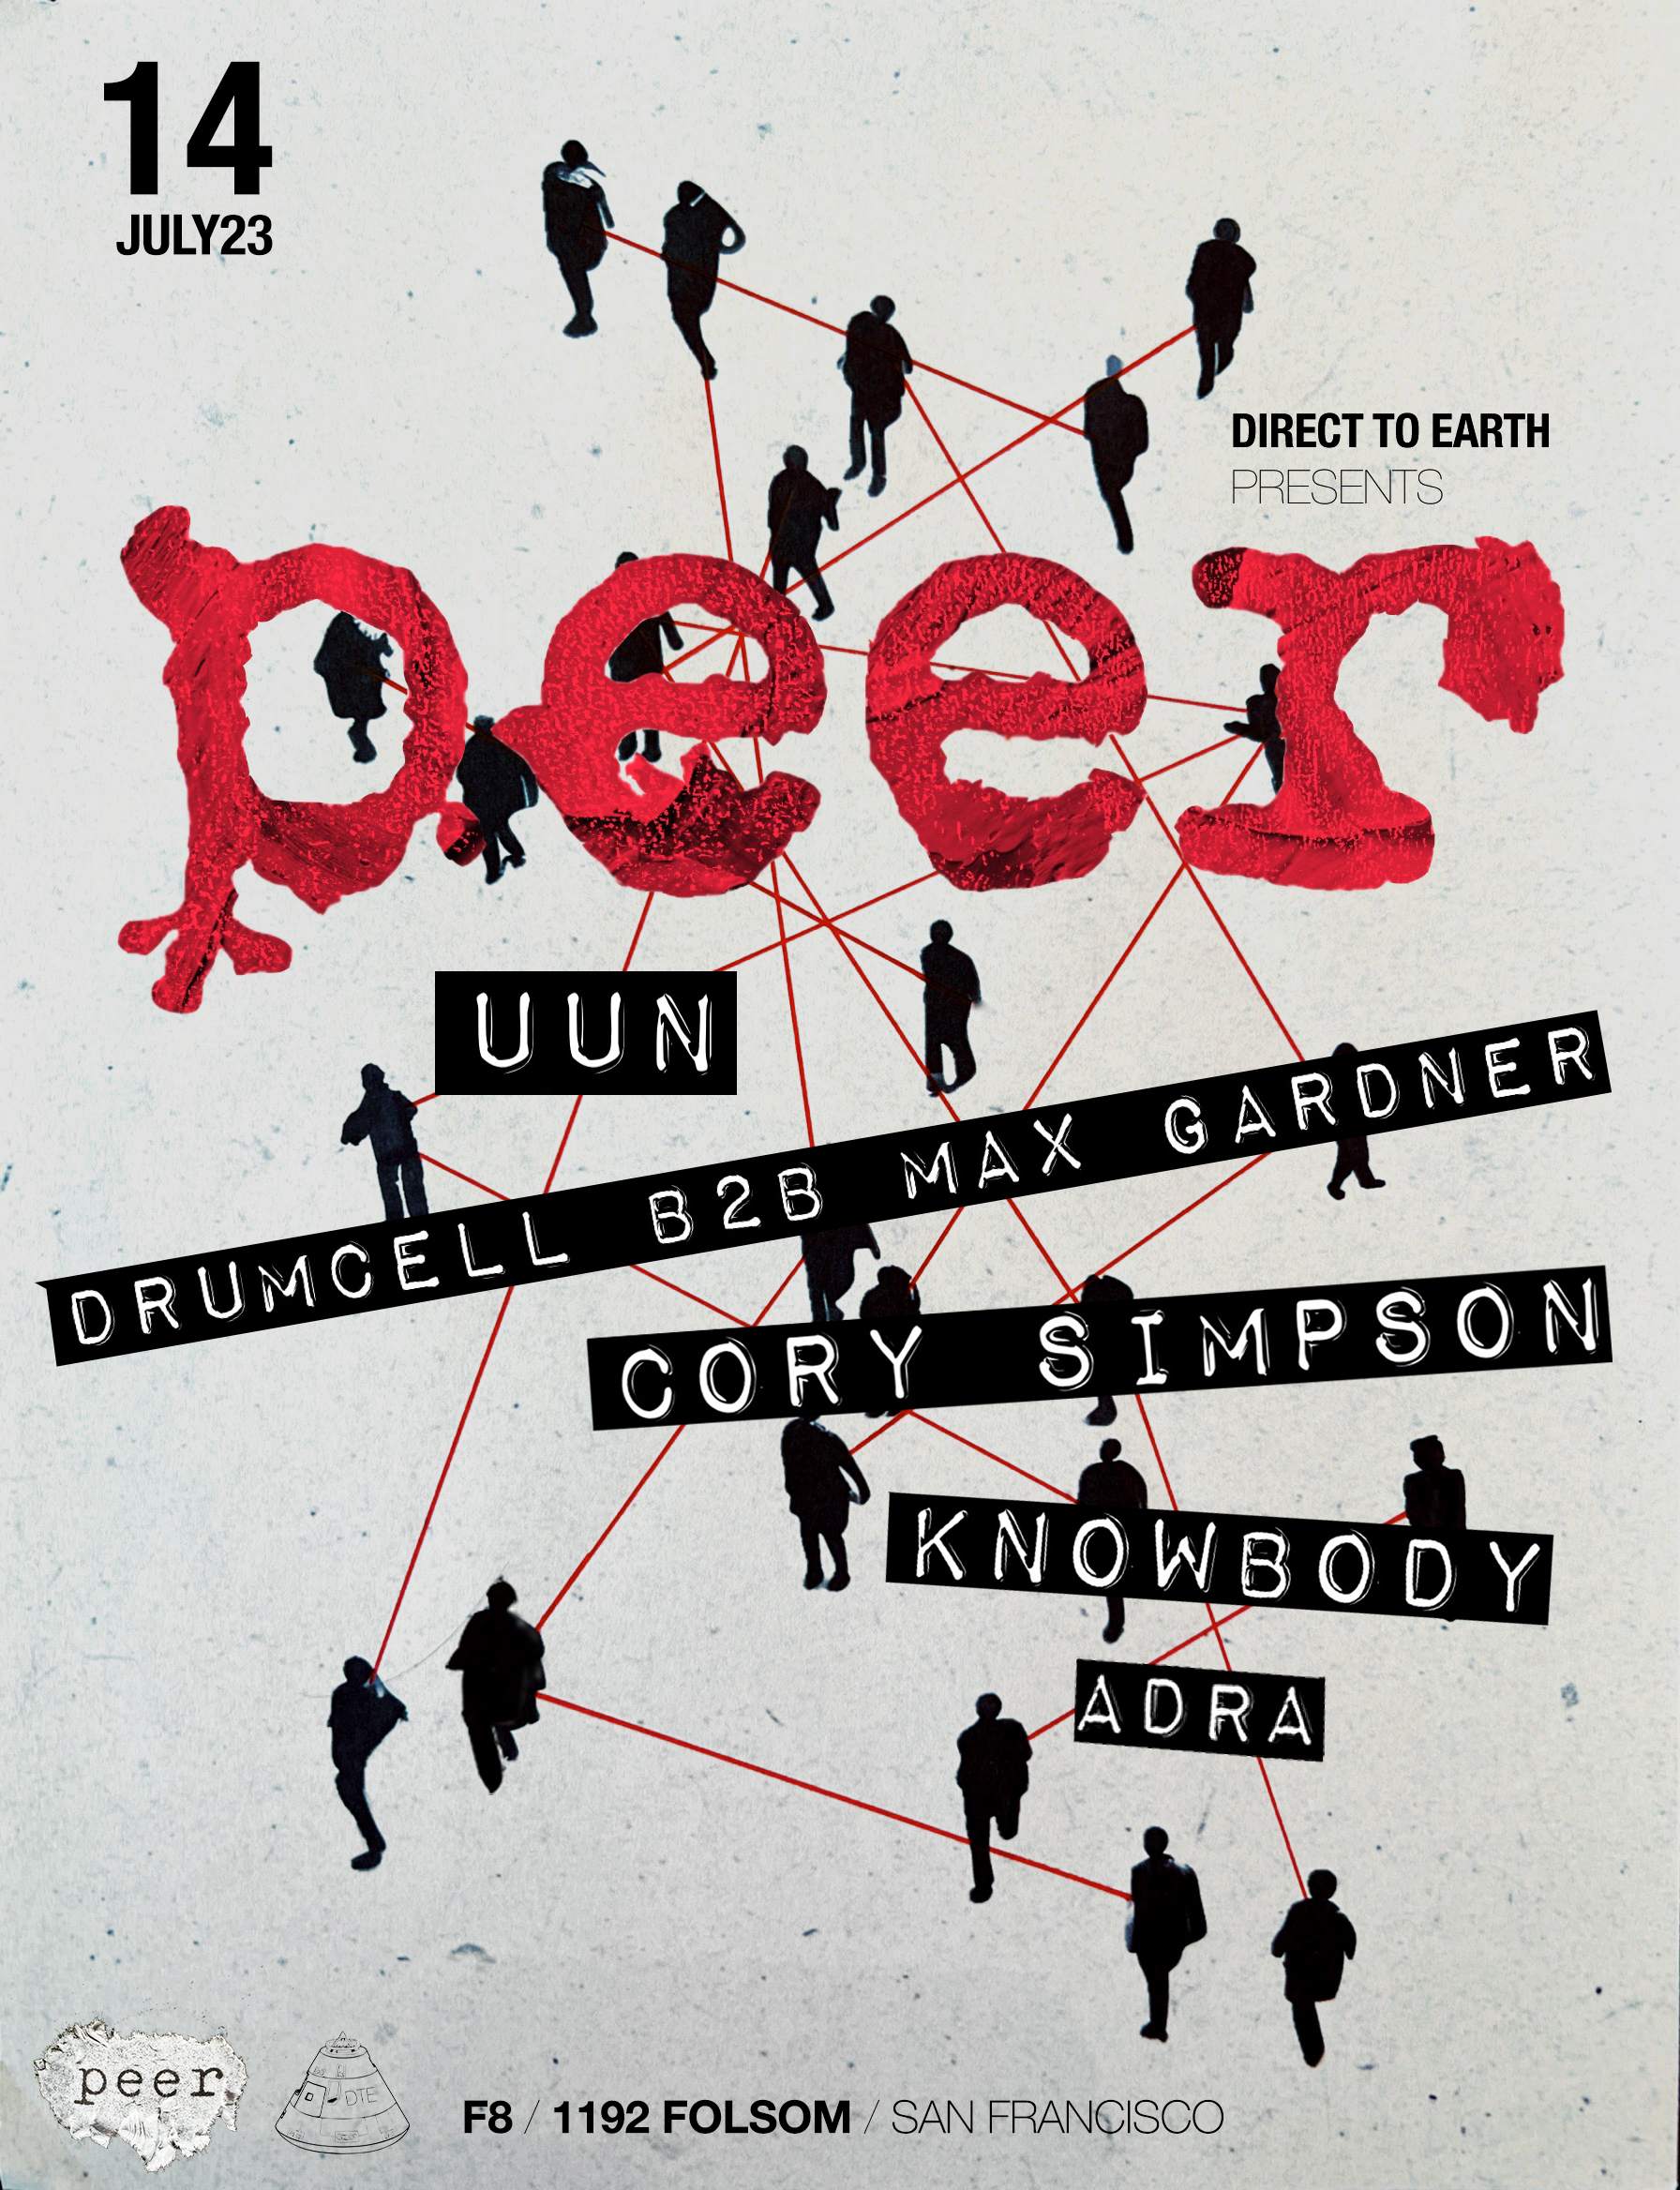 DTE: Peer label showcase with Uun, Drumcell b2b Max Gardner, Cory Simpson, Knowbody and Adra - フライヤー表